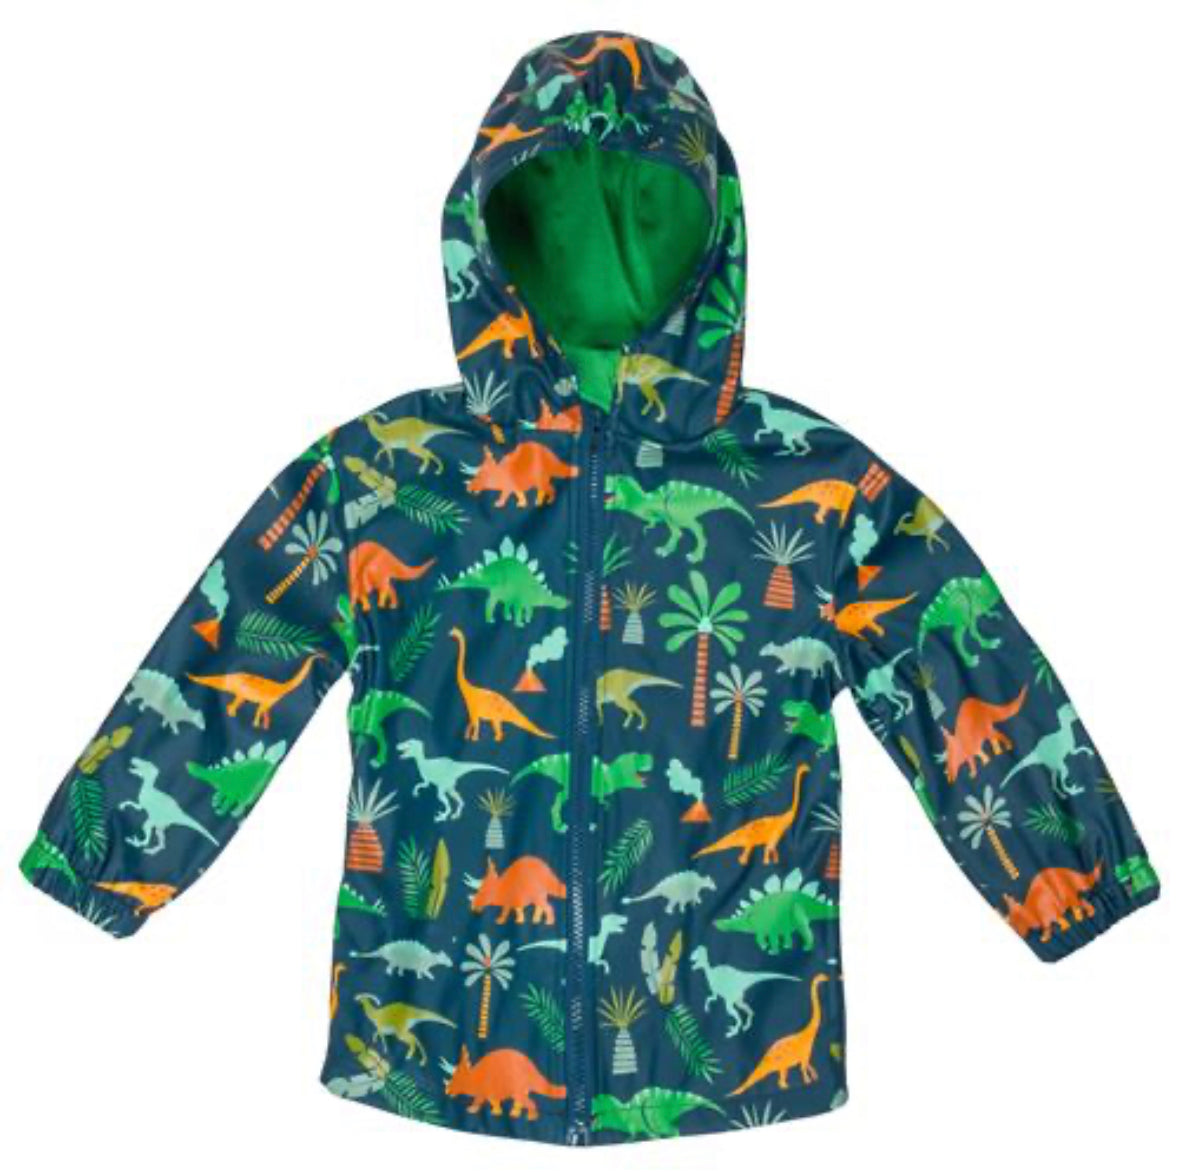 Raincoat - Green Dinosaur     - Chickie Collective